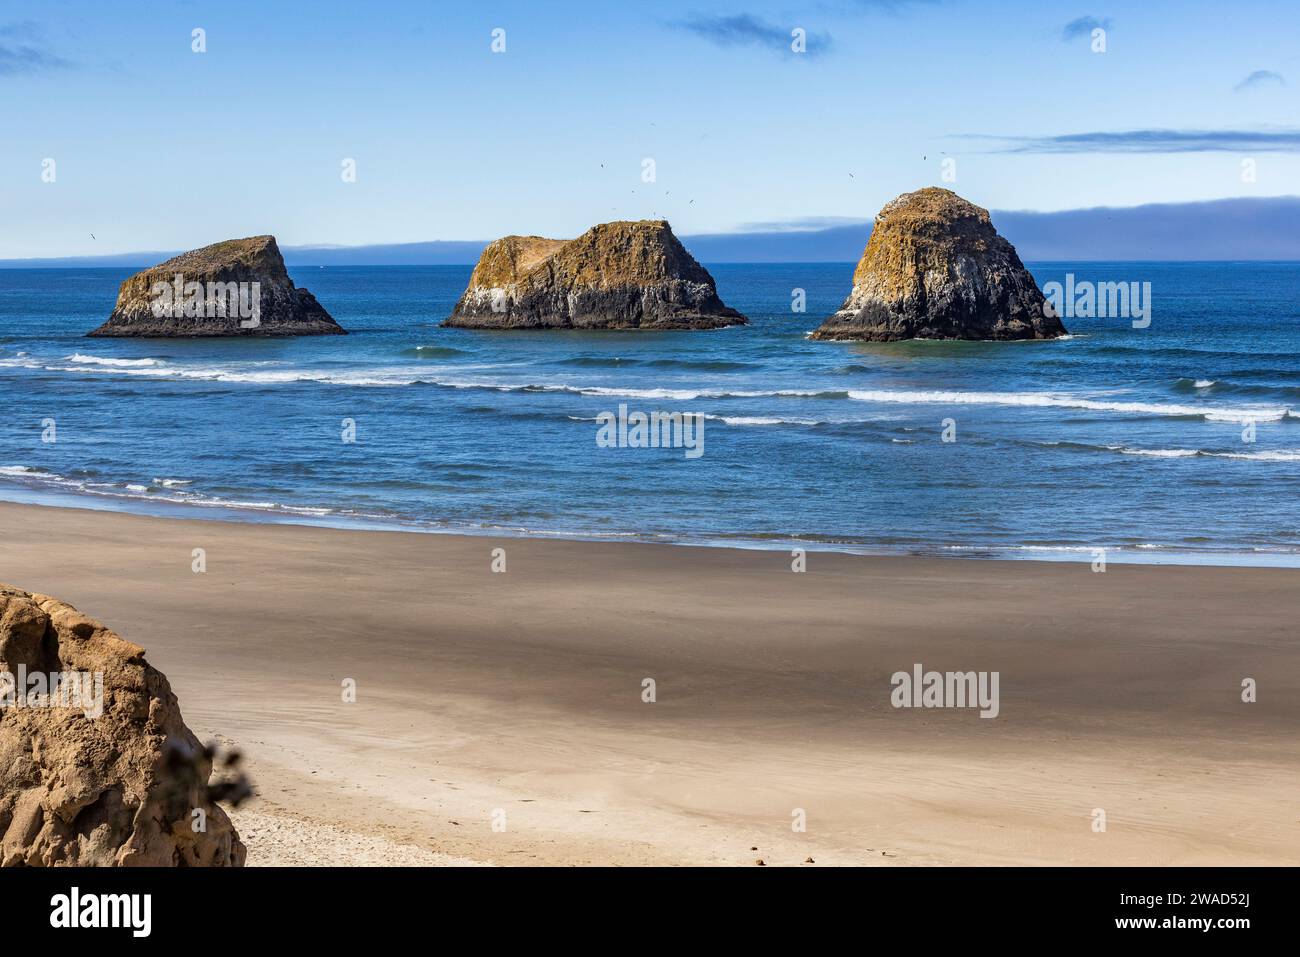 USA, Oregon, Rock formations in sea at Cannon Beach Stock Photo